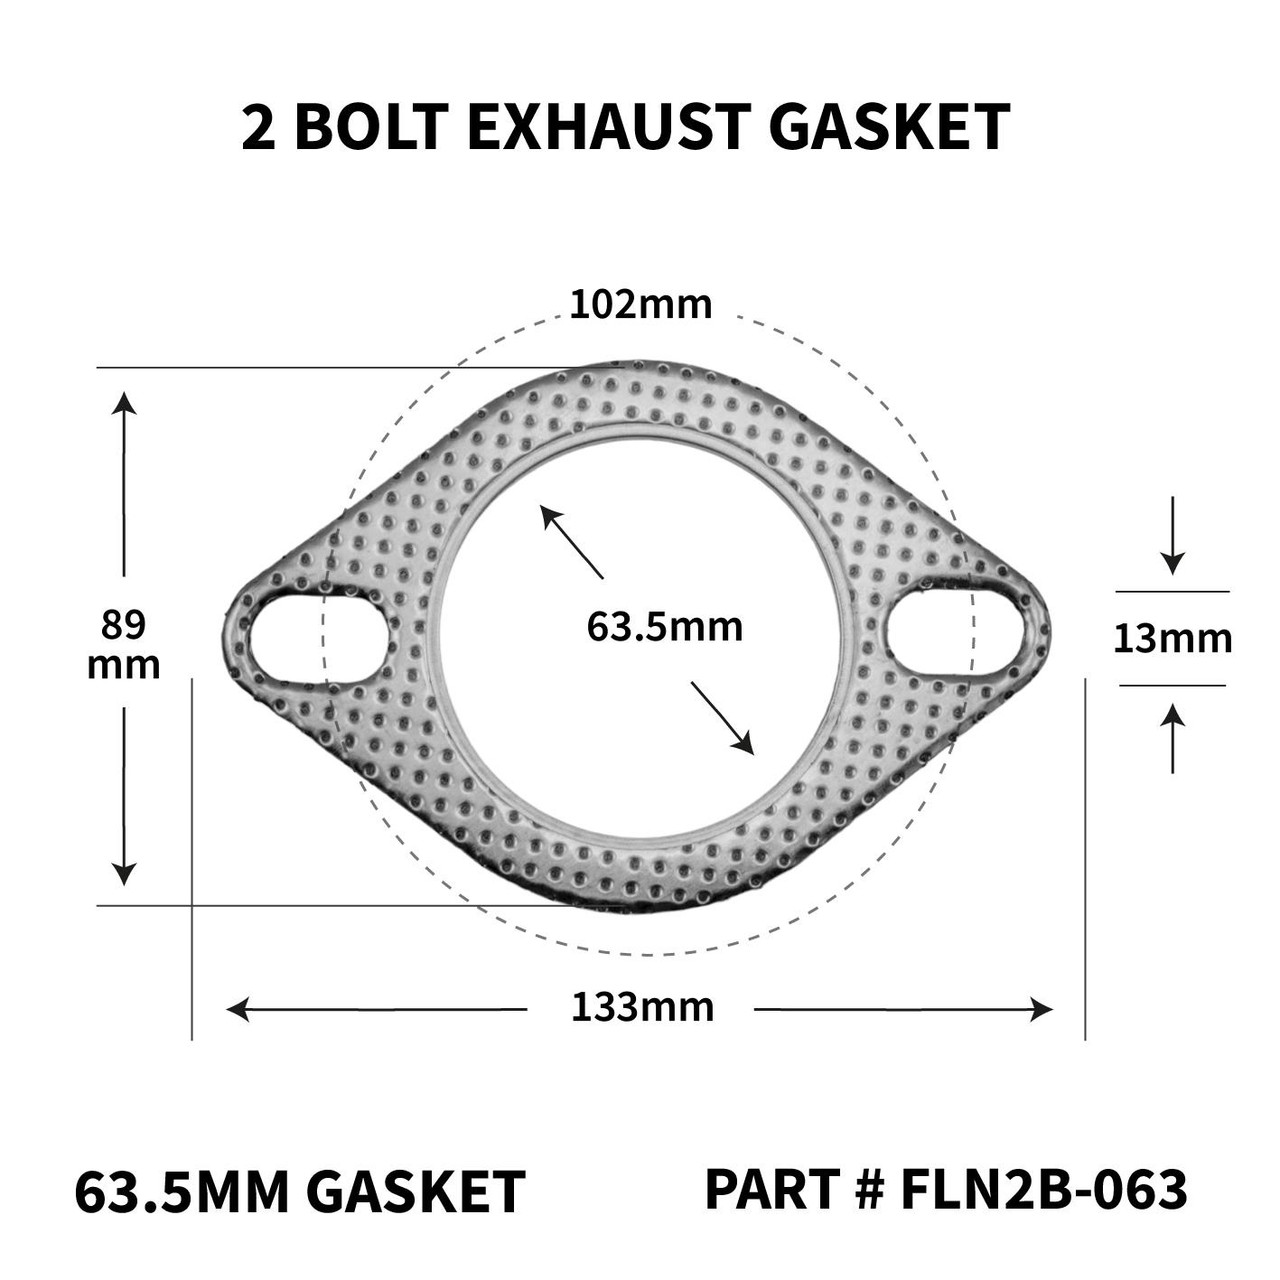 2 PCS Car Exhaust Gasket,2.5 2-Bolt Exhaust Flange Gasket Replacement  OEM#120-06310-0002,Standard Exhaust Manifold Gasket Car Accessories Made of